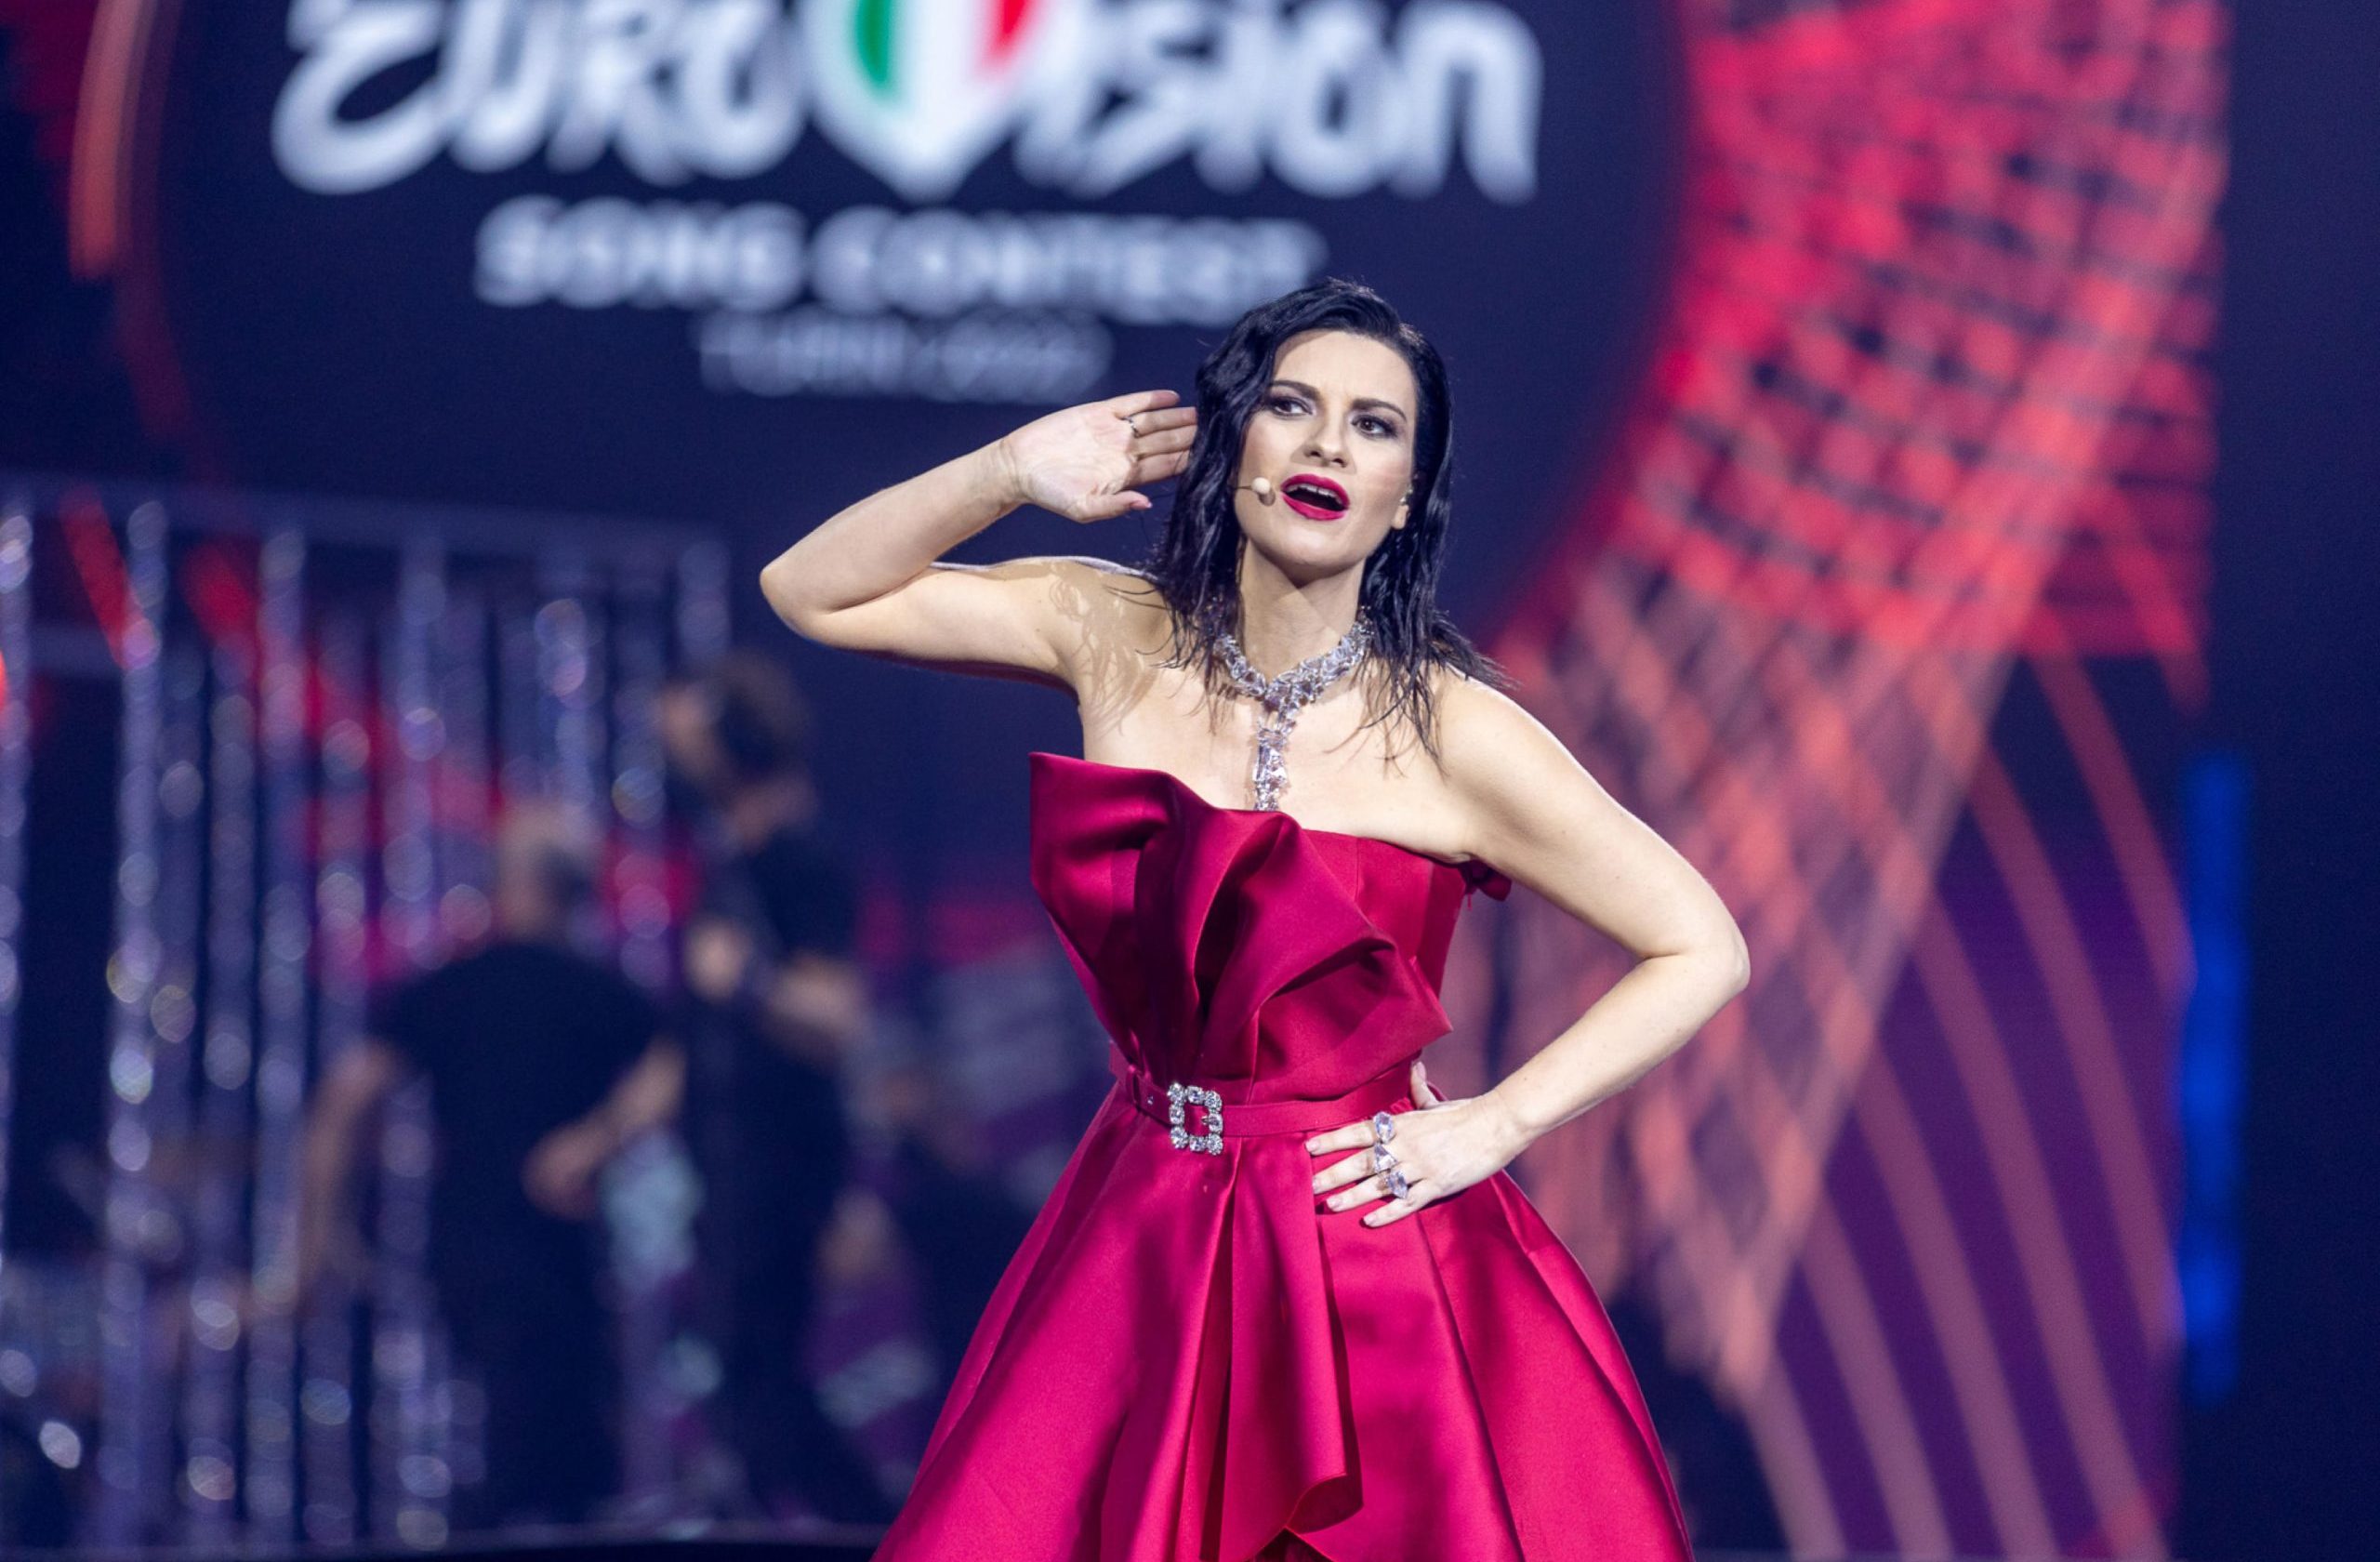 Italian singer Laura Pausini host the second semifinal of the Eurovision Song contest 2022 on May 12, 2022 at the Pala Alpitour venue in Turin. ANSA/GOIGEST PRESS OFFICE +++ NO SALES, EDITORIAL USE ONLY +++